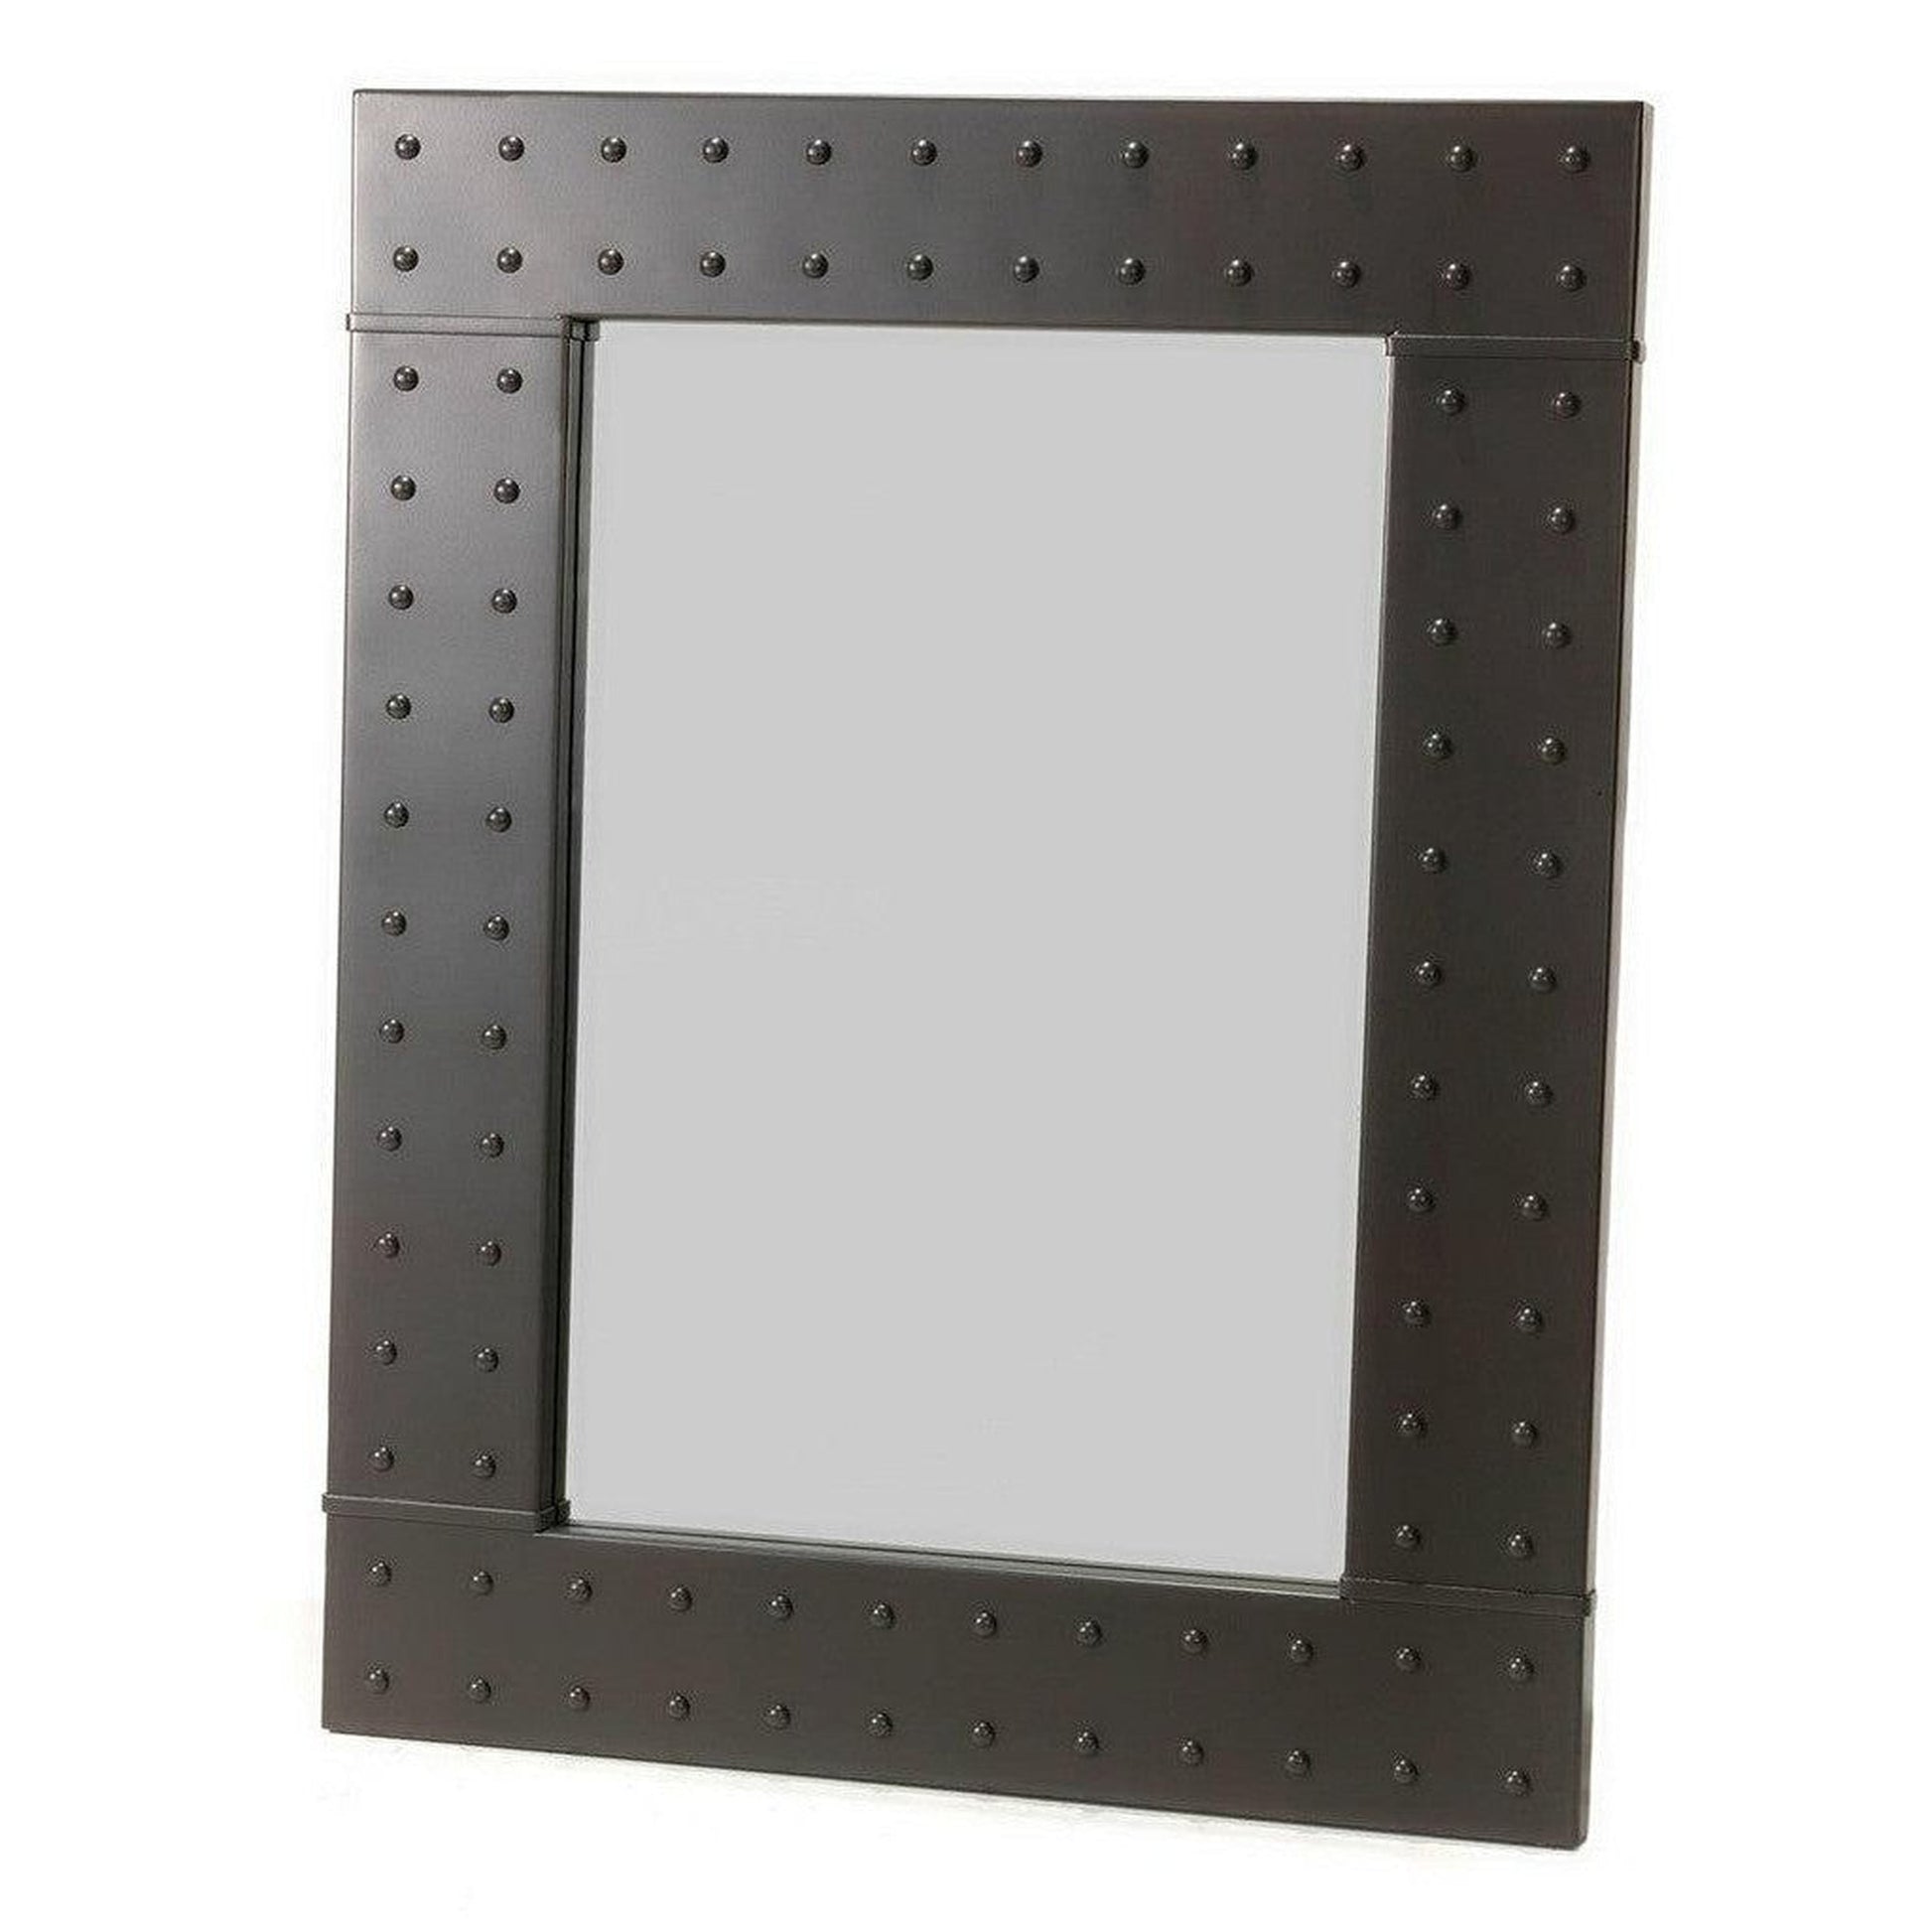 Stone County Ironworks Merrimack Rivet 36" x 45" Large Satin Black Iron Wall Mirror With Gold Iron Accent